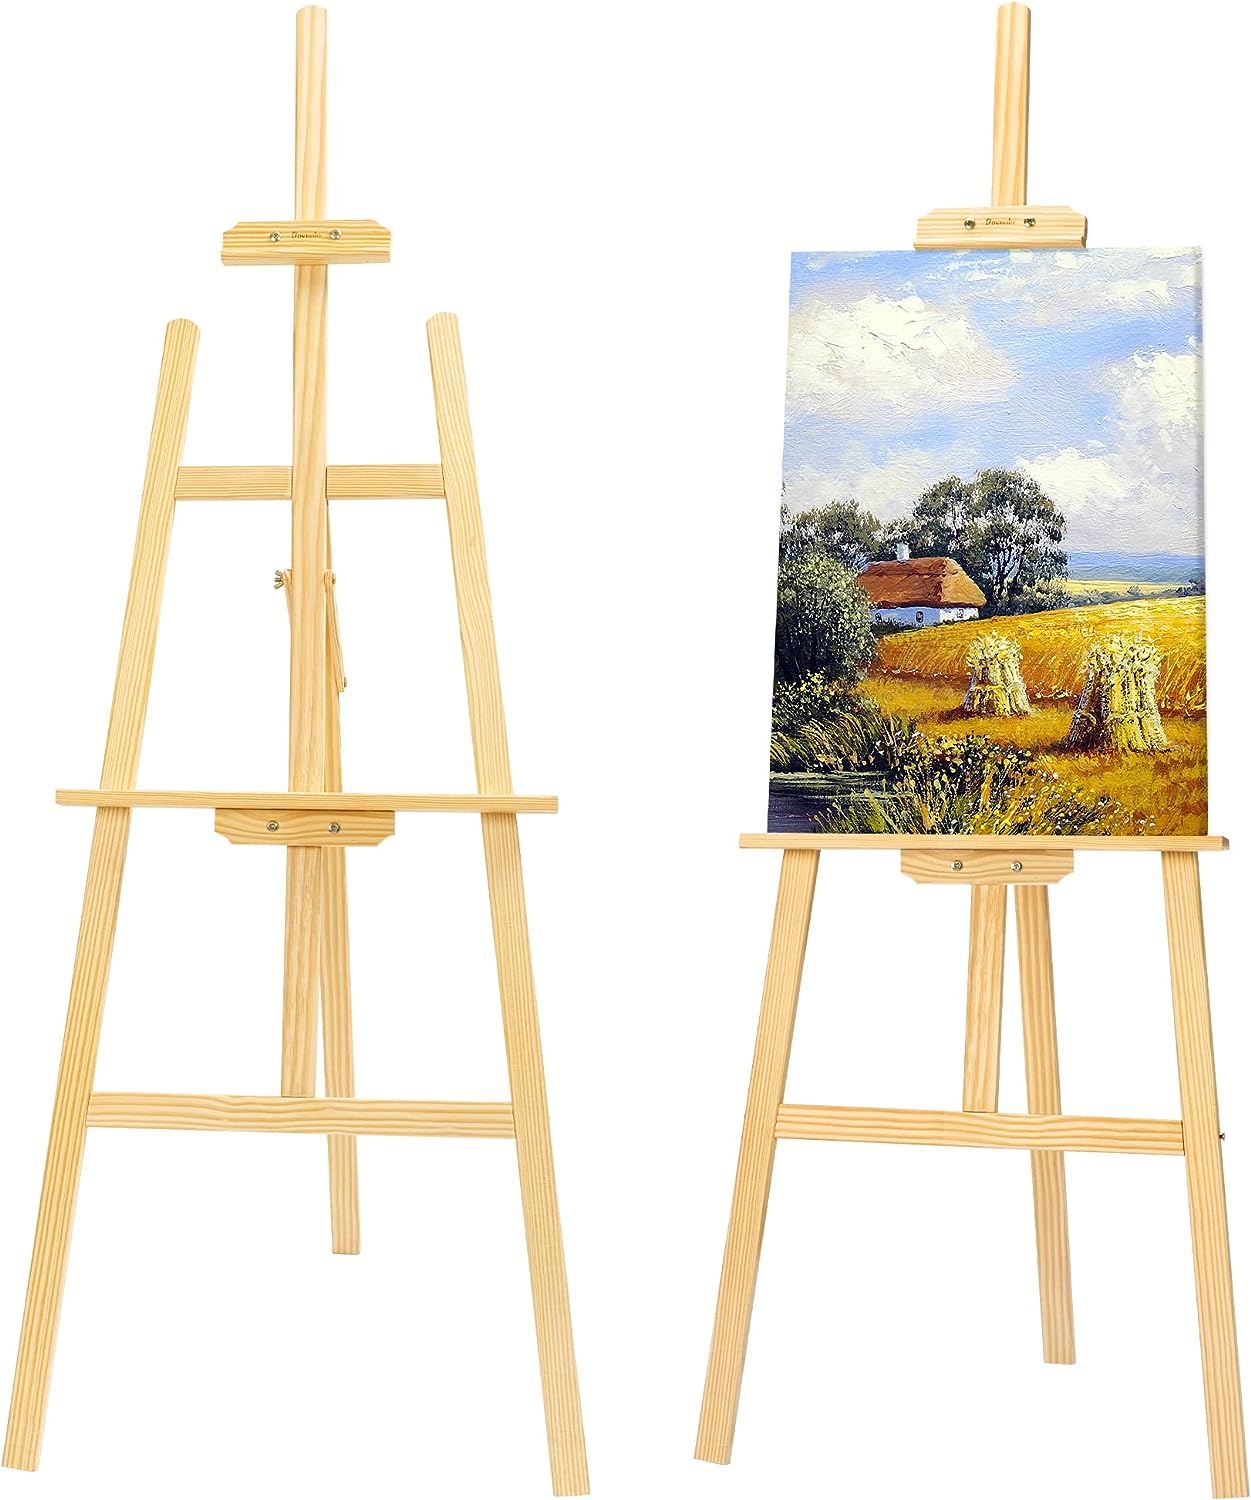 Starhoo starhoo 12 inch tabletop easel for painting canvas table